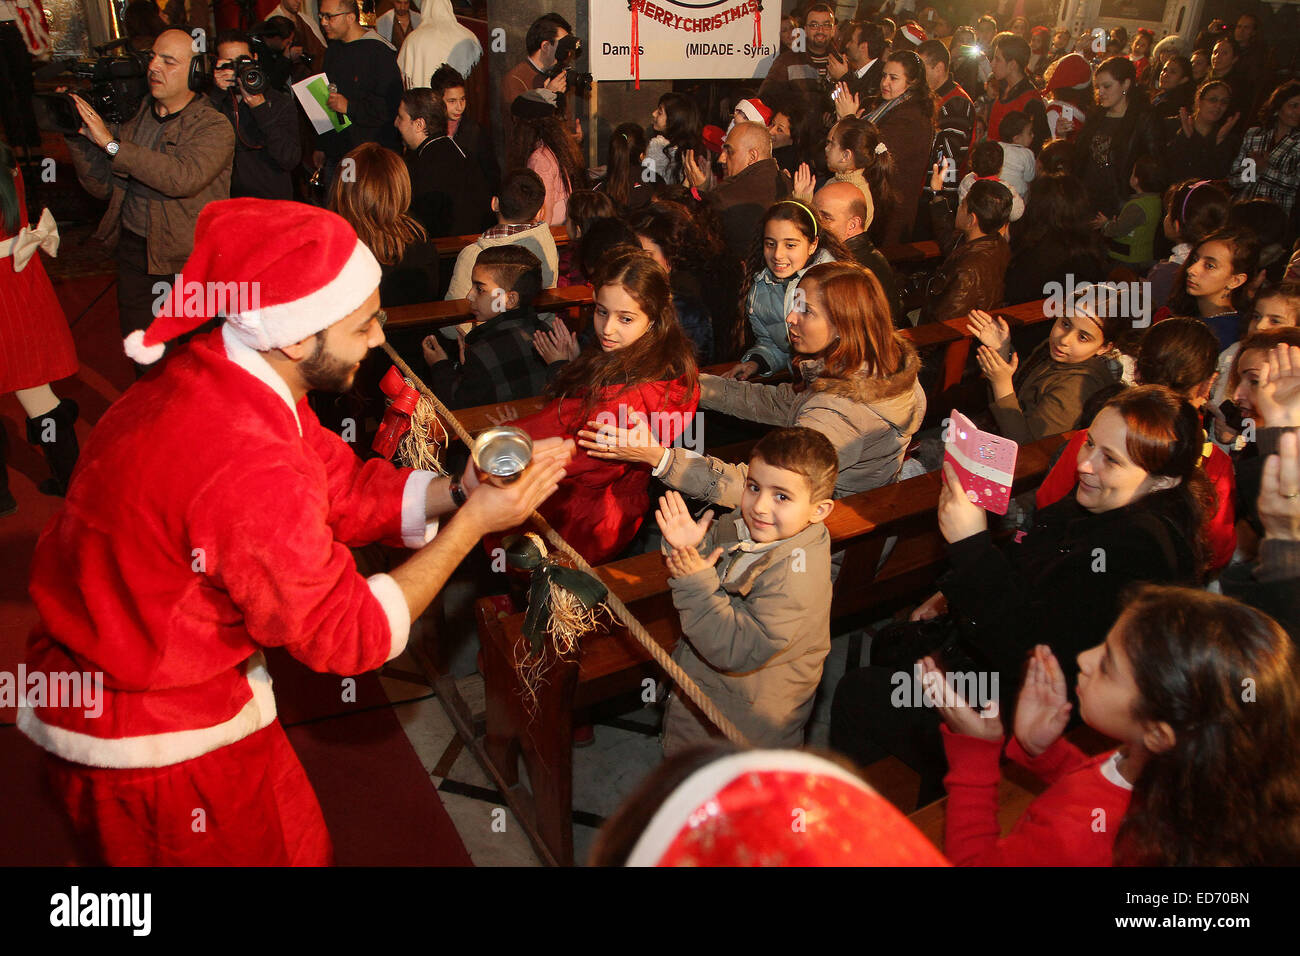 Damascus, Syria. 30th Dec, 2014. People watch the performance during the Christmas celebration at al-Zaitoun Cathedral in Damascus, capital of Syria, on Dec. 30, 2014. About 1,500 Syrian Christian kids and their parents gathered at al-Zaitoun Cathedral in Syria's capital Damascus to take part in a Christmas celebration. About 10 percent of population in Syria are Christian, who suffered persecution in some parts of the country by the hands of the extremist groups. © Bassem Tellawi/Xinhua/Alamy Live News Stock Photo